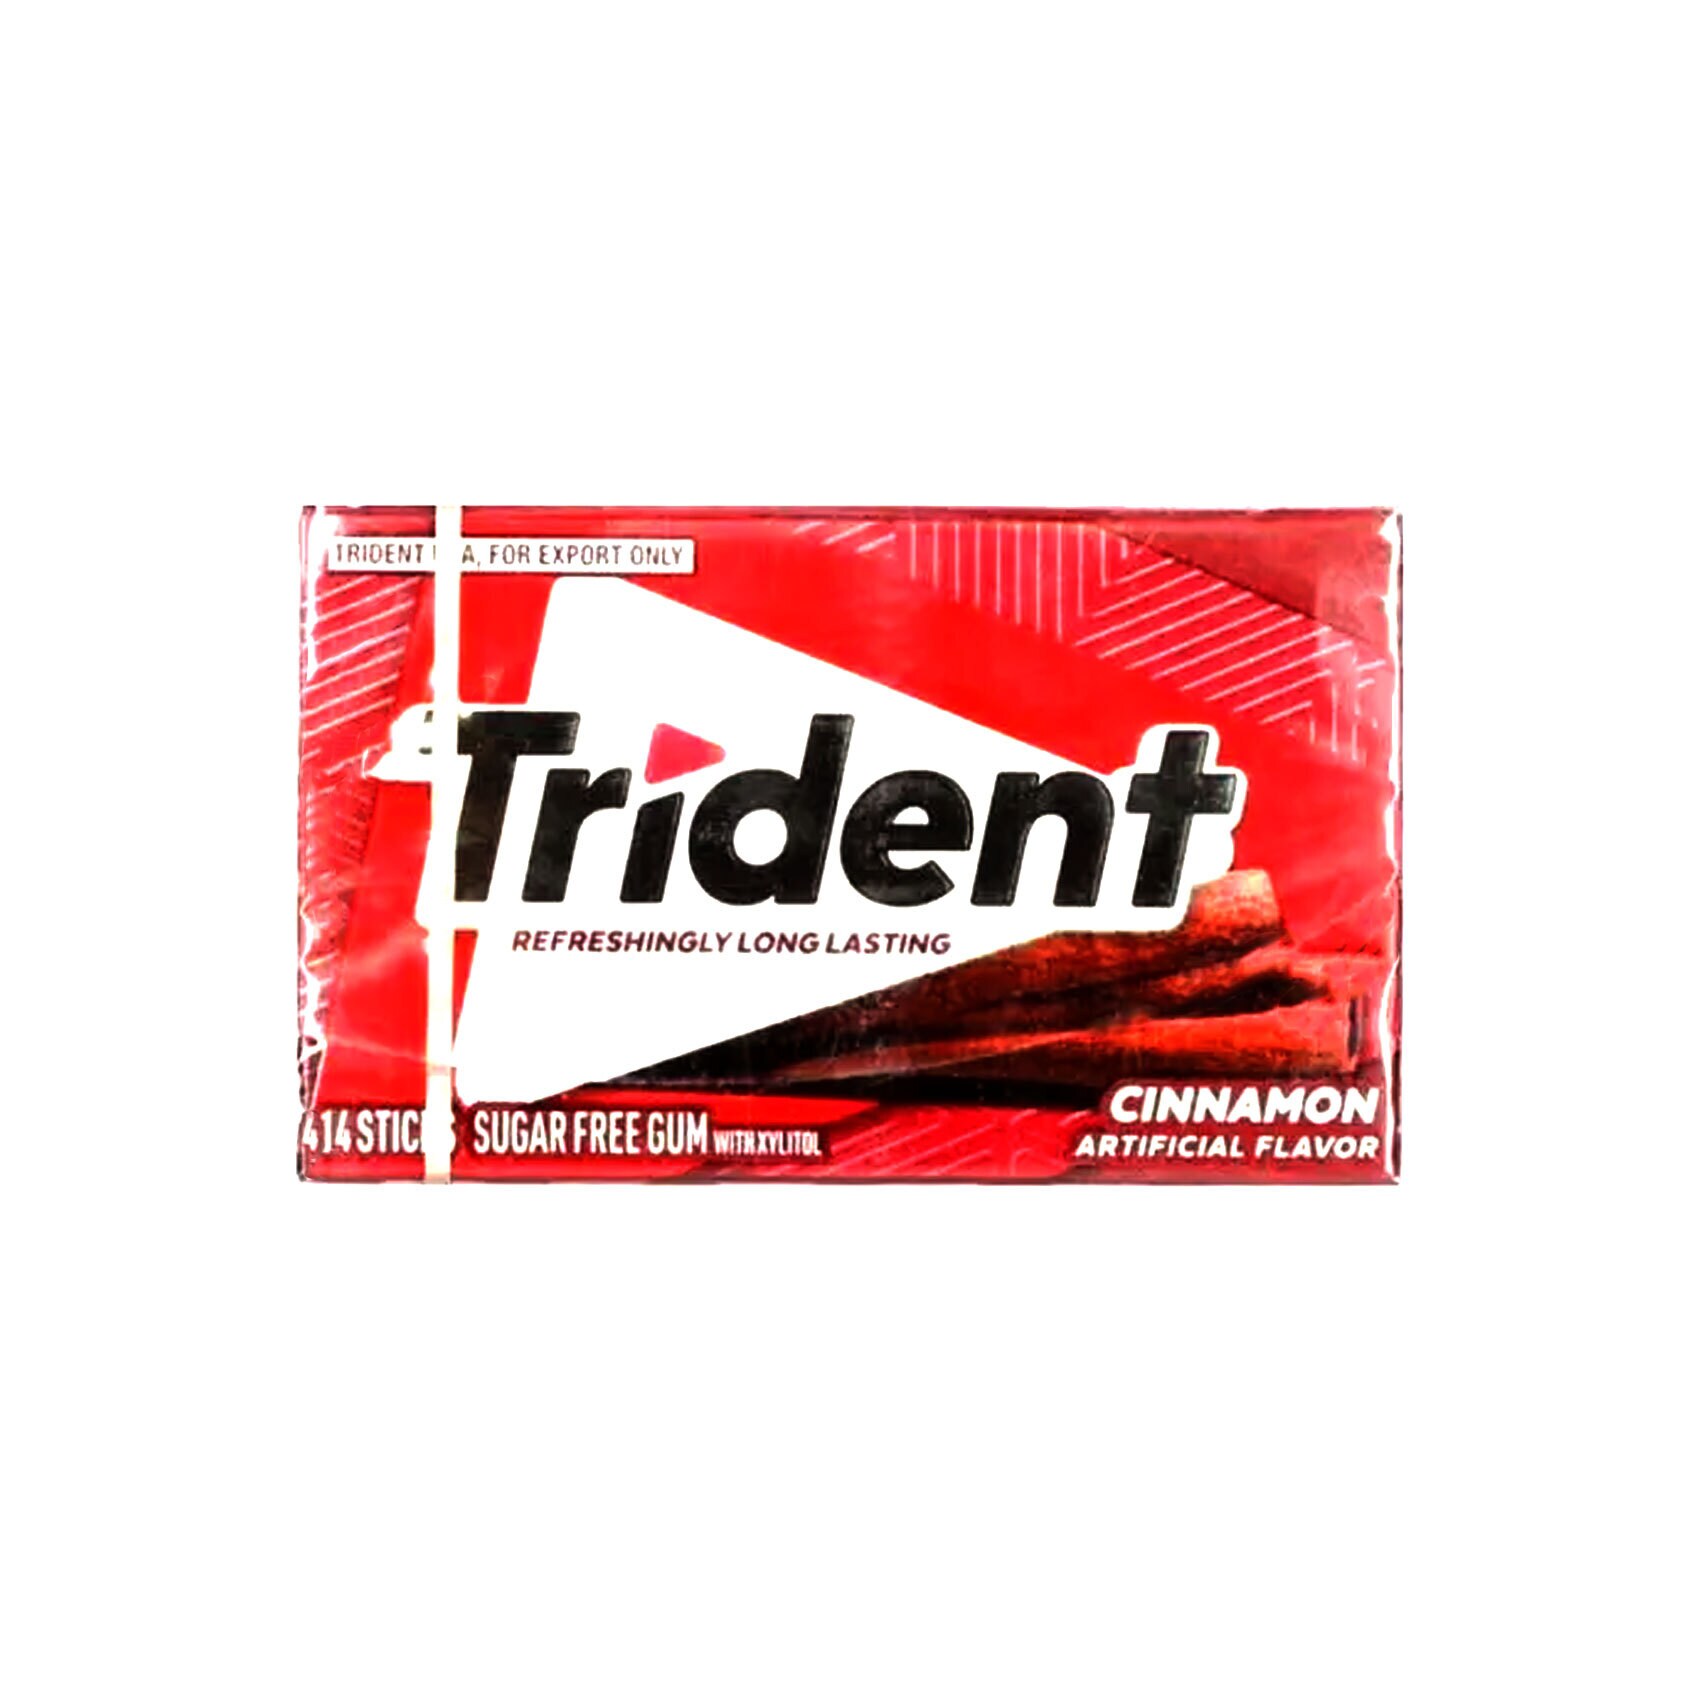 Trident cinnamon chewing gums